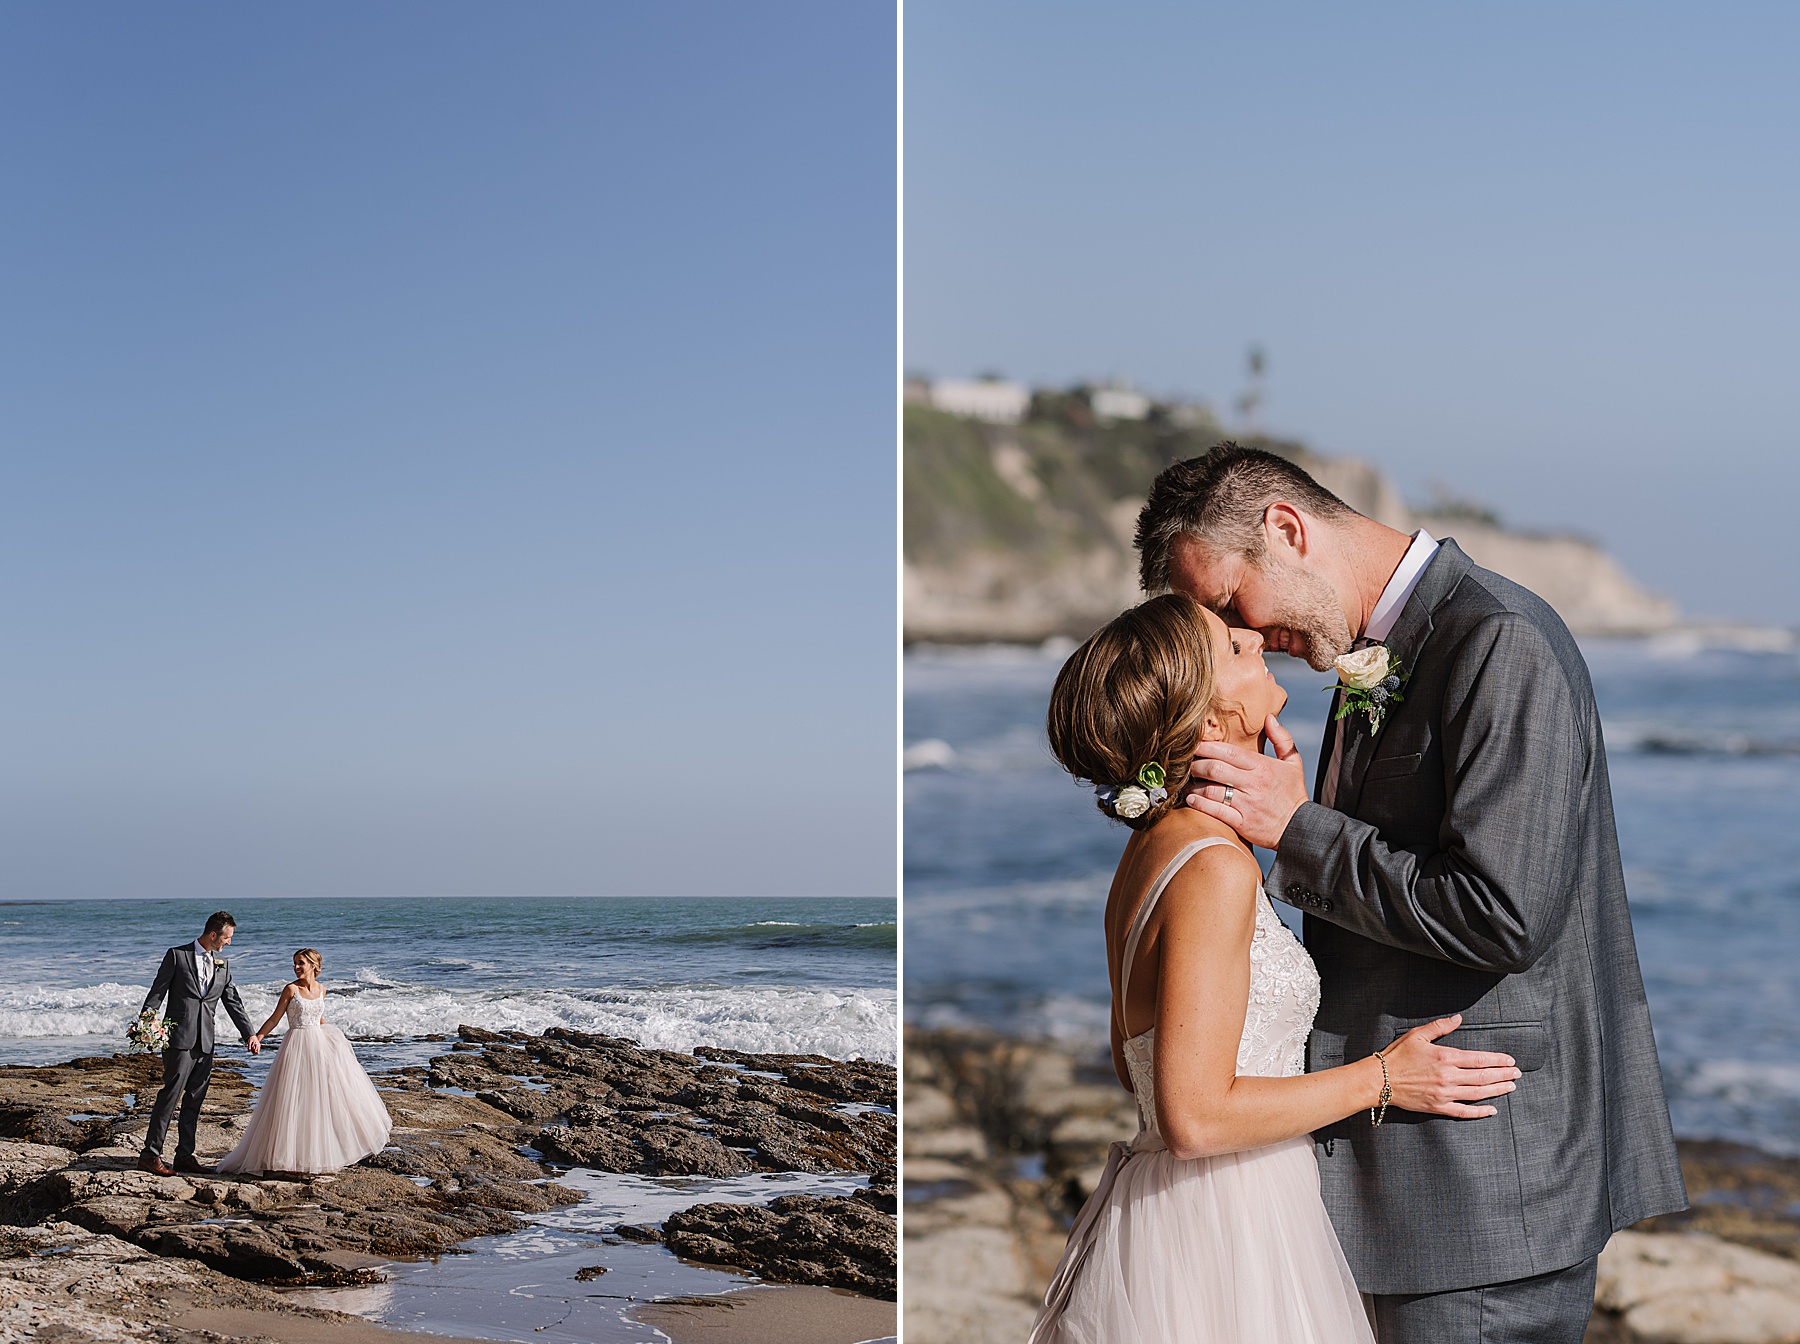 Nikkles Photography, a California wedding photographer, shares her tips for building a perfect wedding day timeline for your wedding.